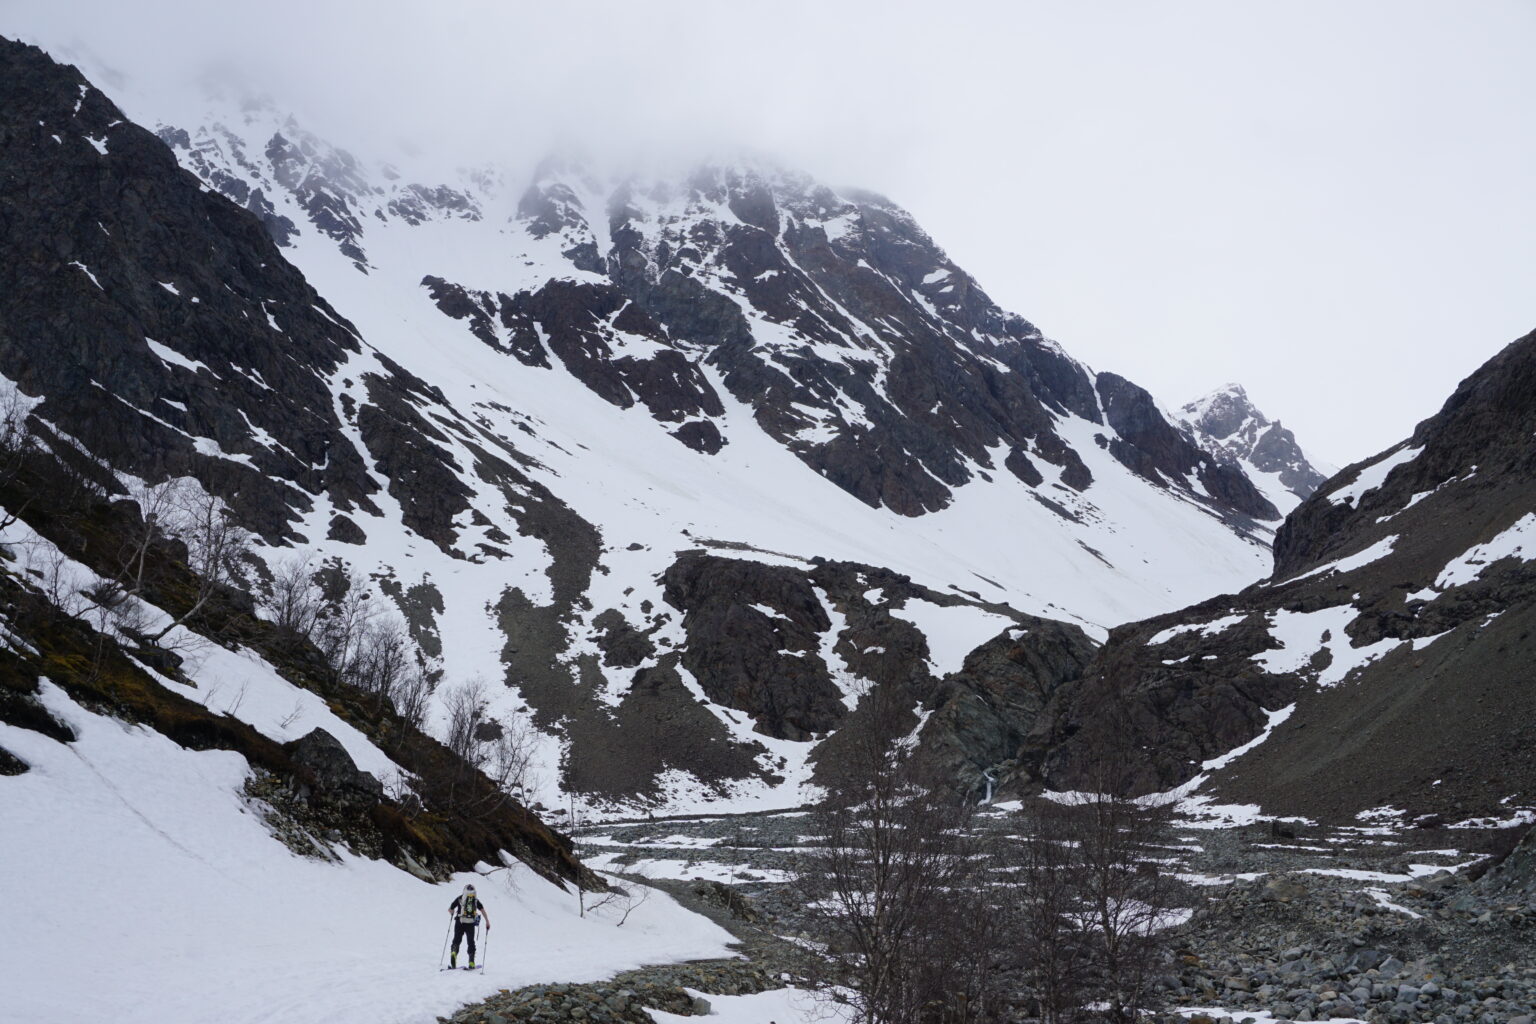 Ski touring to the mouse trap before Strupbeen Glacier